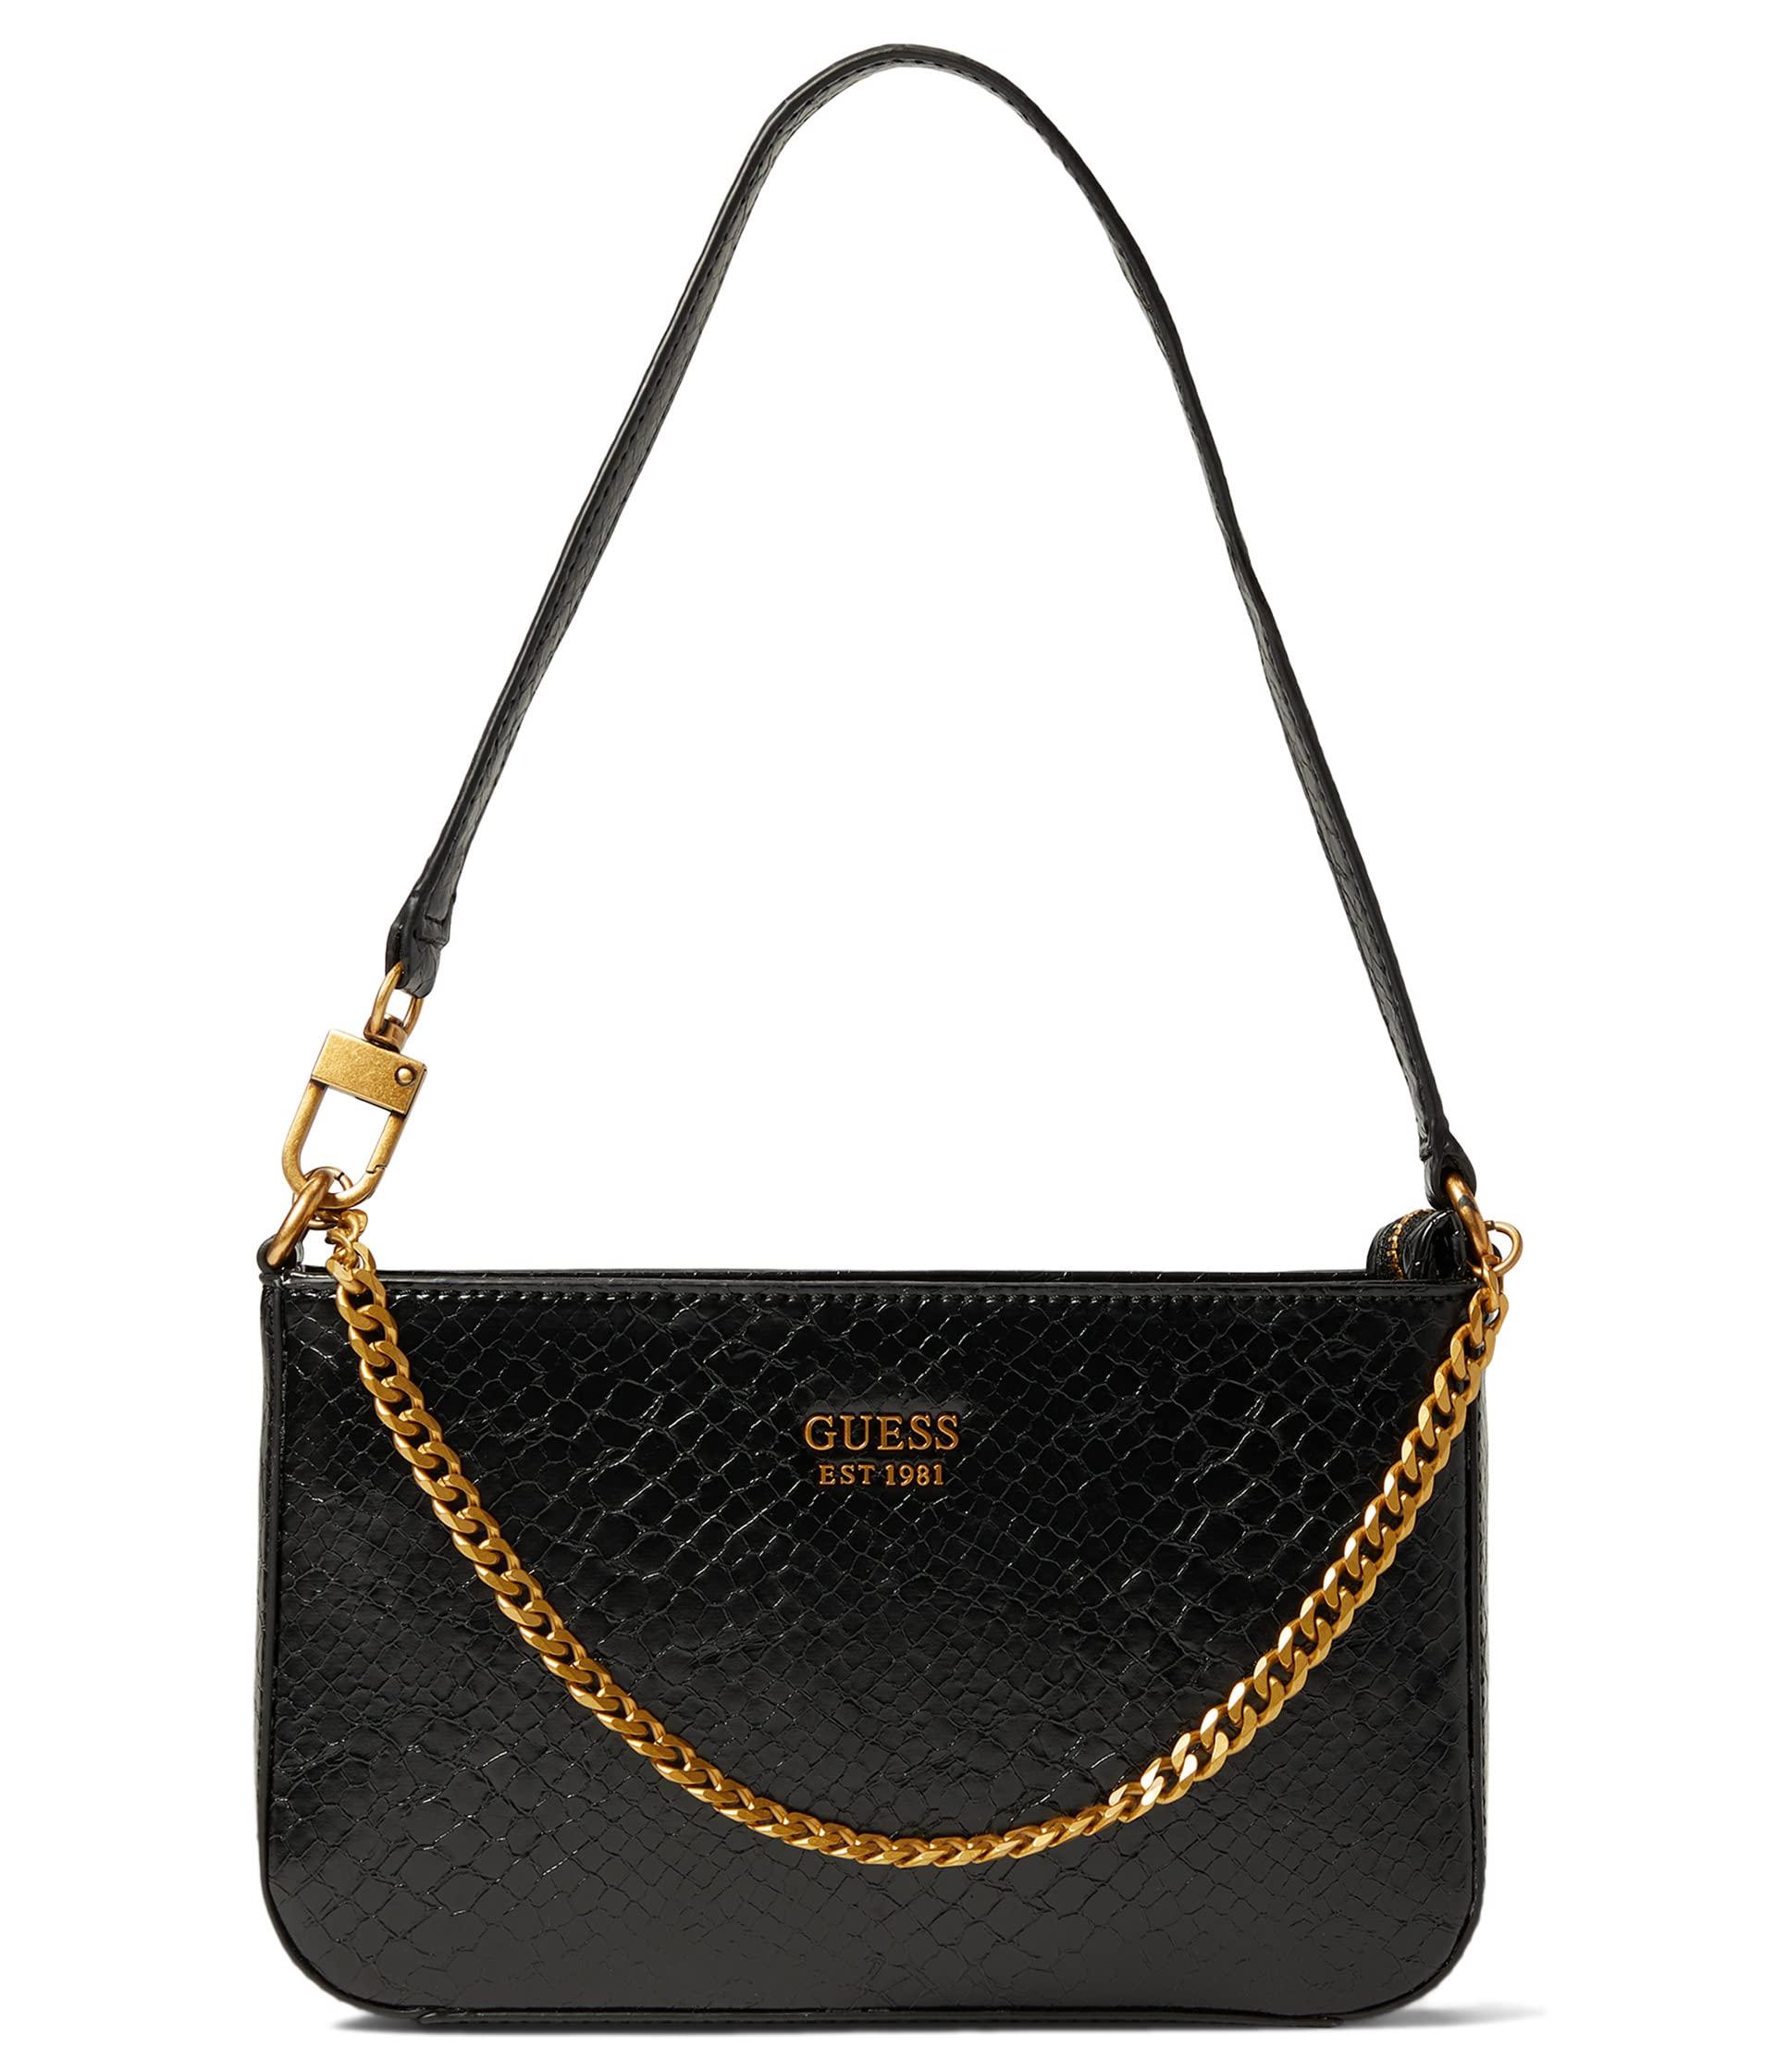 GUESS Katey Luxe Mini Top Zip Shoulder Bag, Black, One_size price